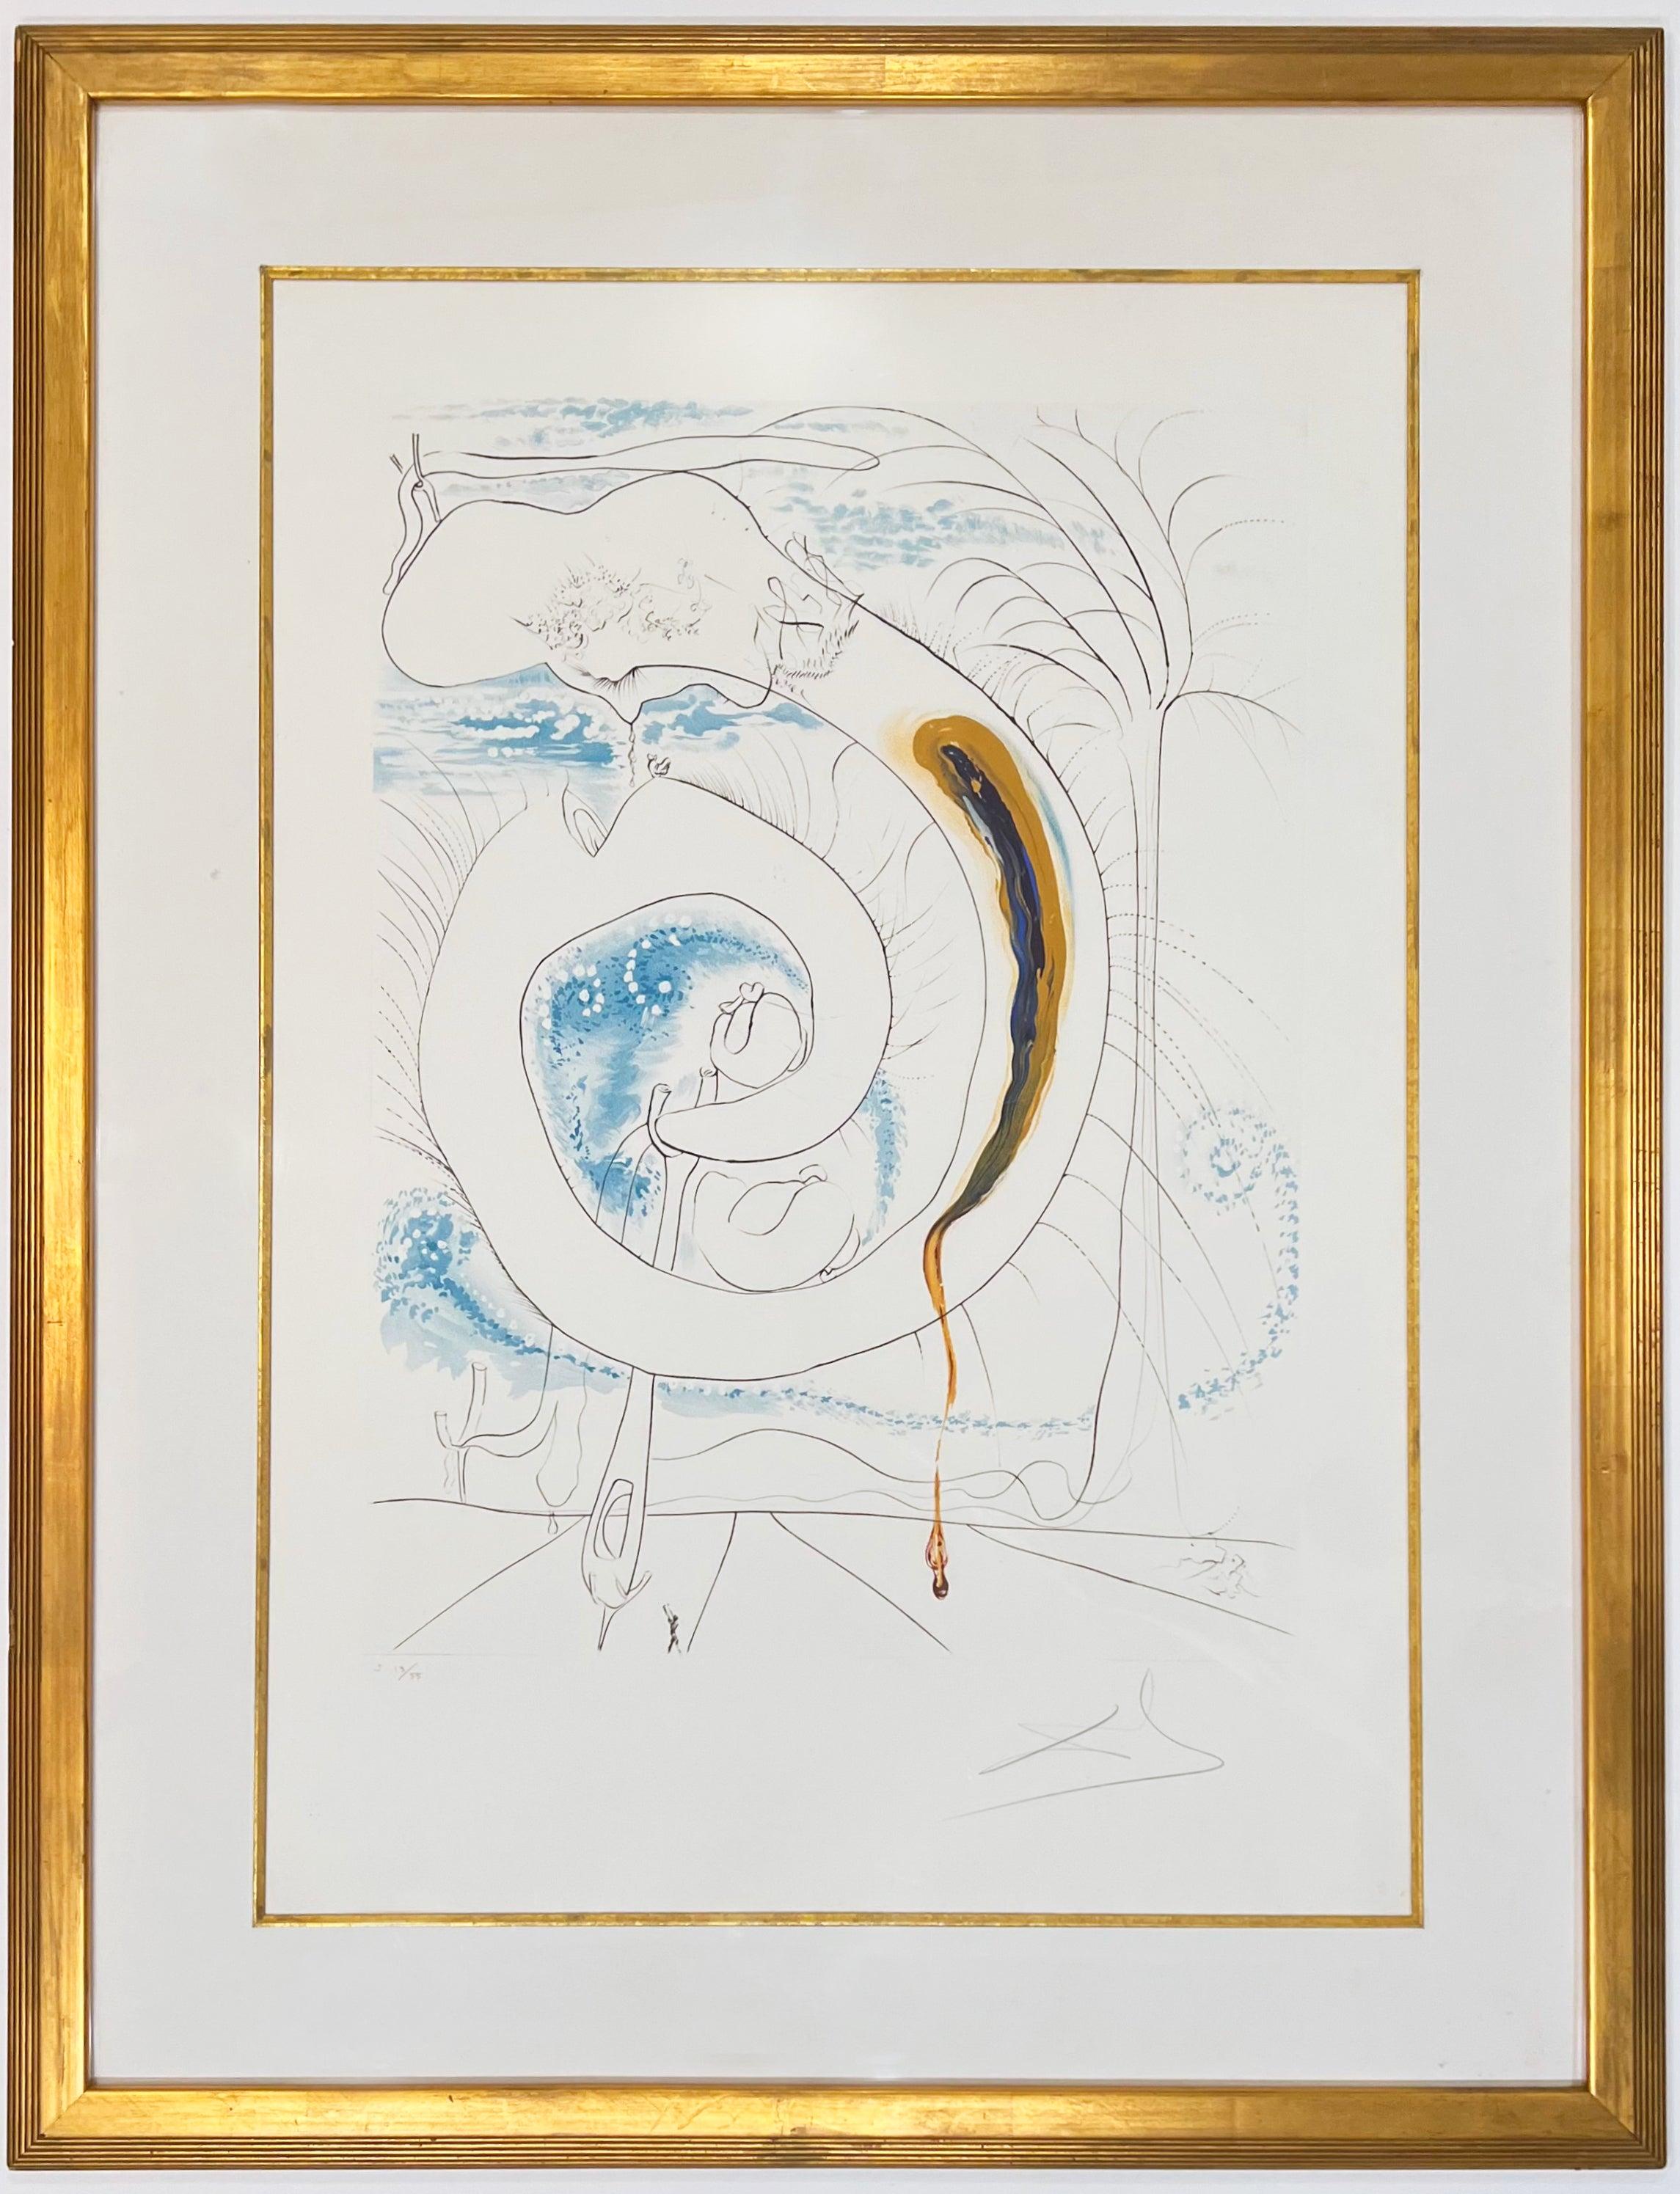 The Visceral Circle of the Cosmos - Print by Salvador Dalí